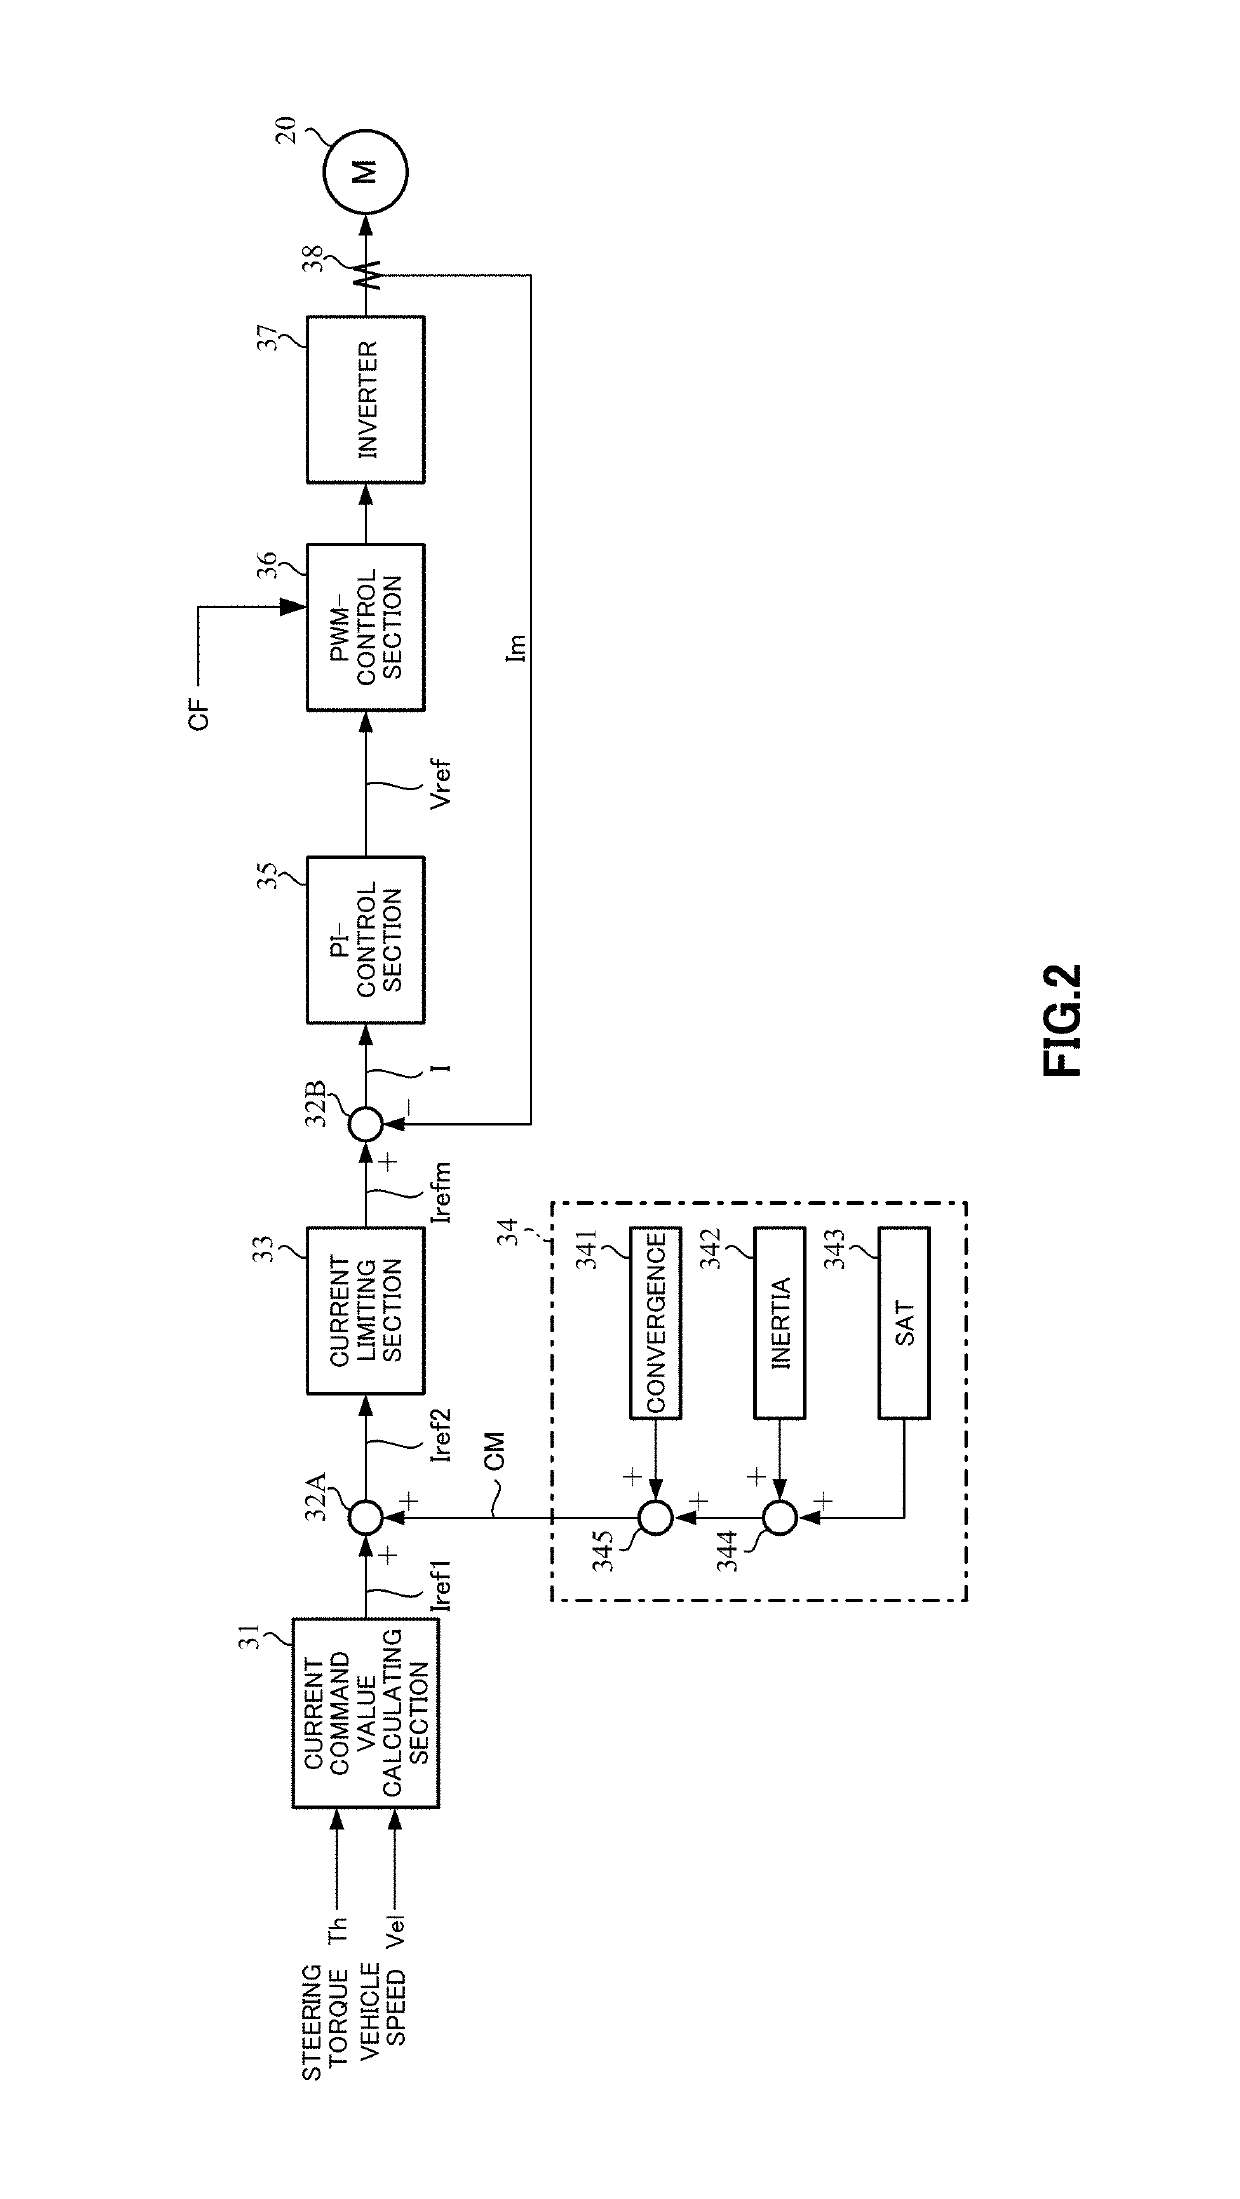 Electronic part mounting heat-dissipating substrate